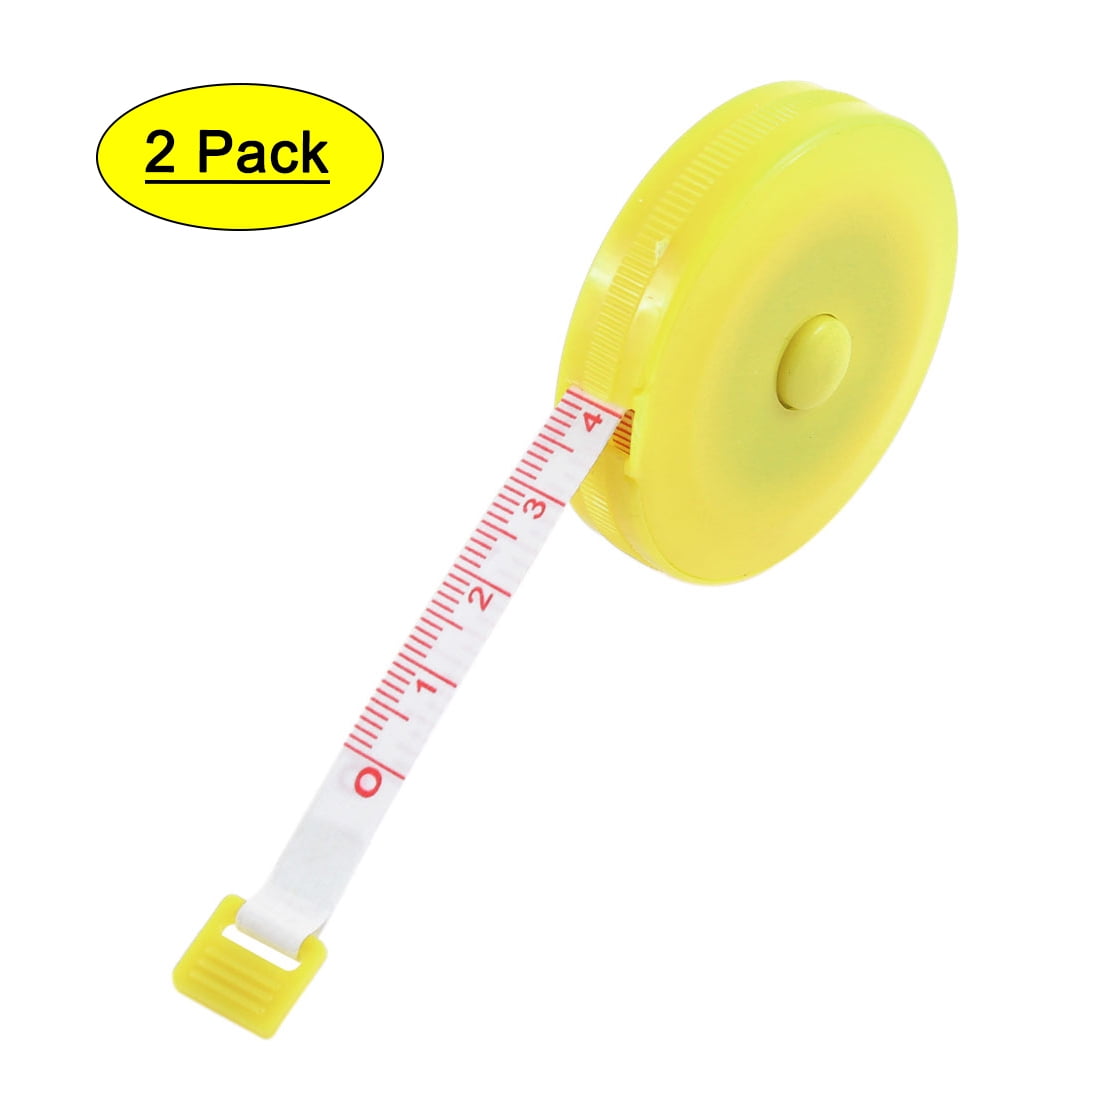 60 Inch 150 cm Soft Tailor Tape Measure for Cloth Sewing Waist Bra Head Circumference Tailor Double Sided Cloth Ruler 3 Pack Tape Measure for Body Measuring Tailor Tape White 